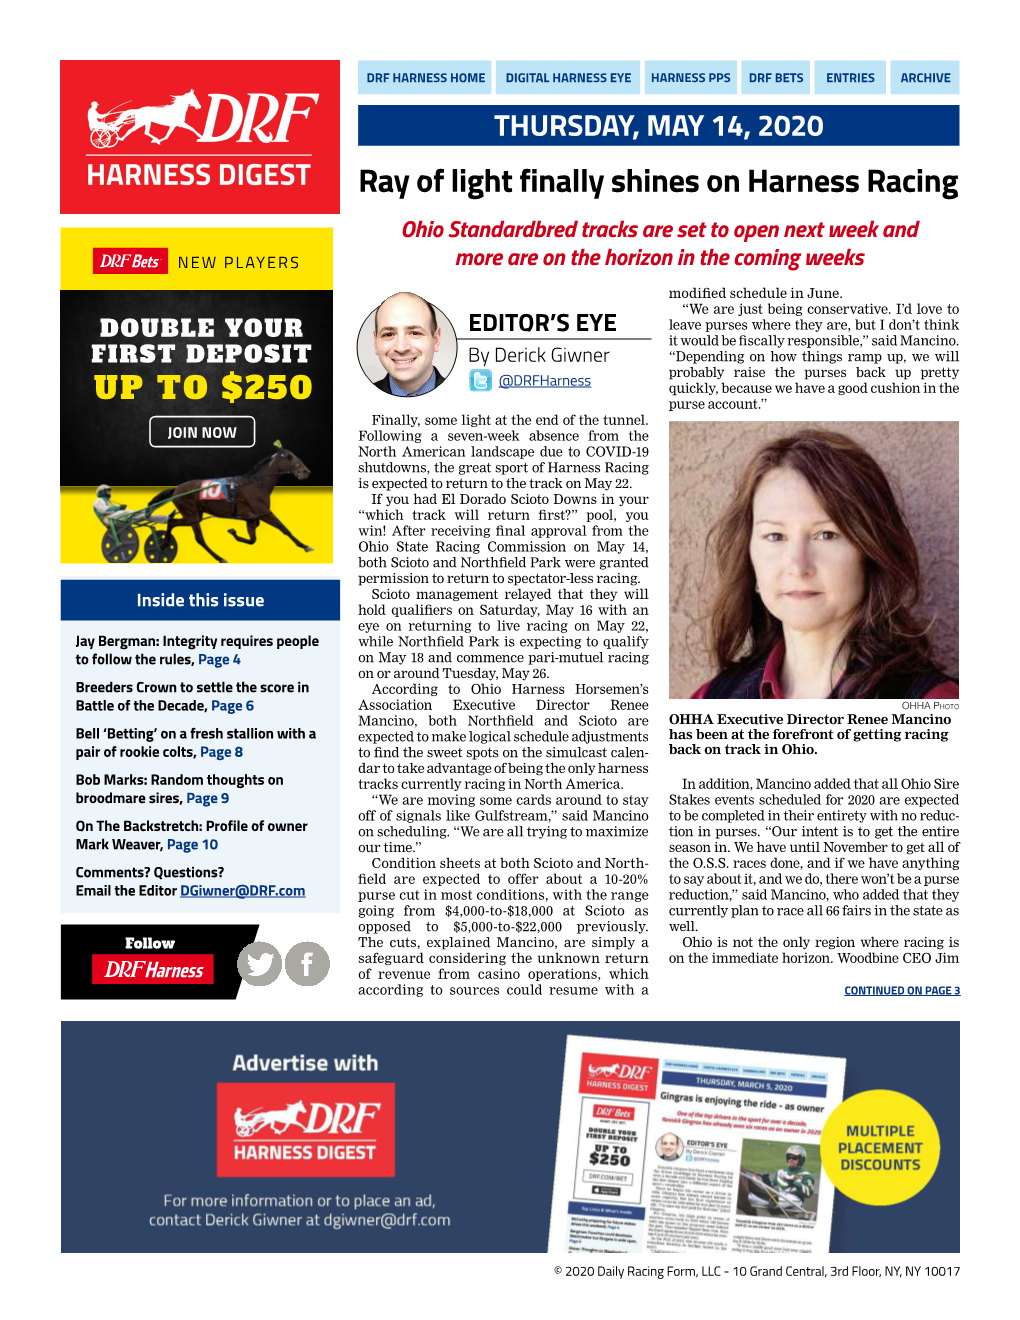 Ray of Light Finally Shines on Harness Racing Ohio Standardbred Tracks Are Set to Open Next Week and NEW PLAYERS More Are on the Horizon in the Coming Weeks